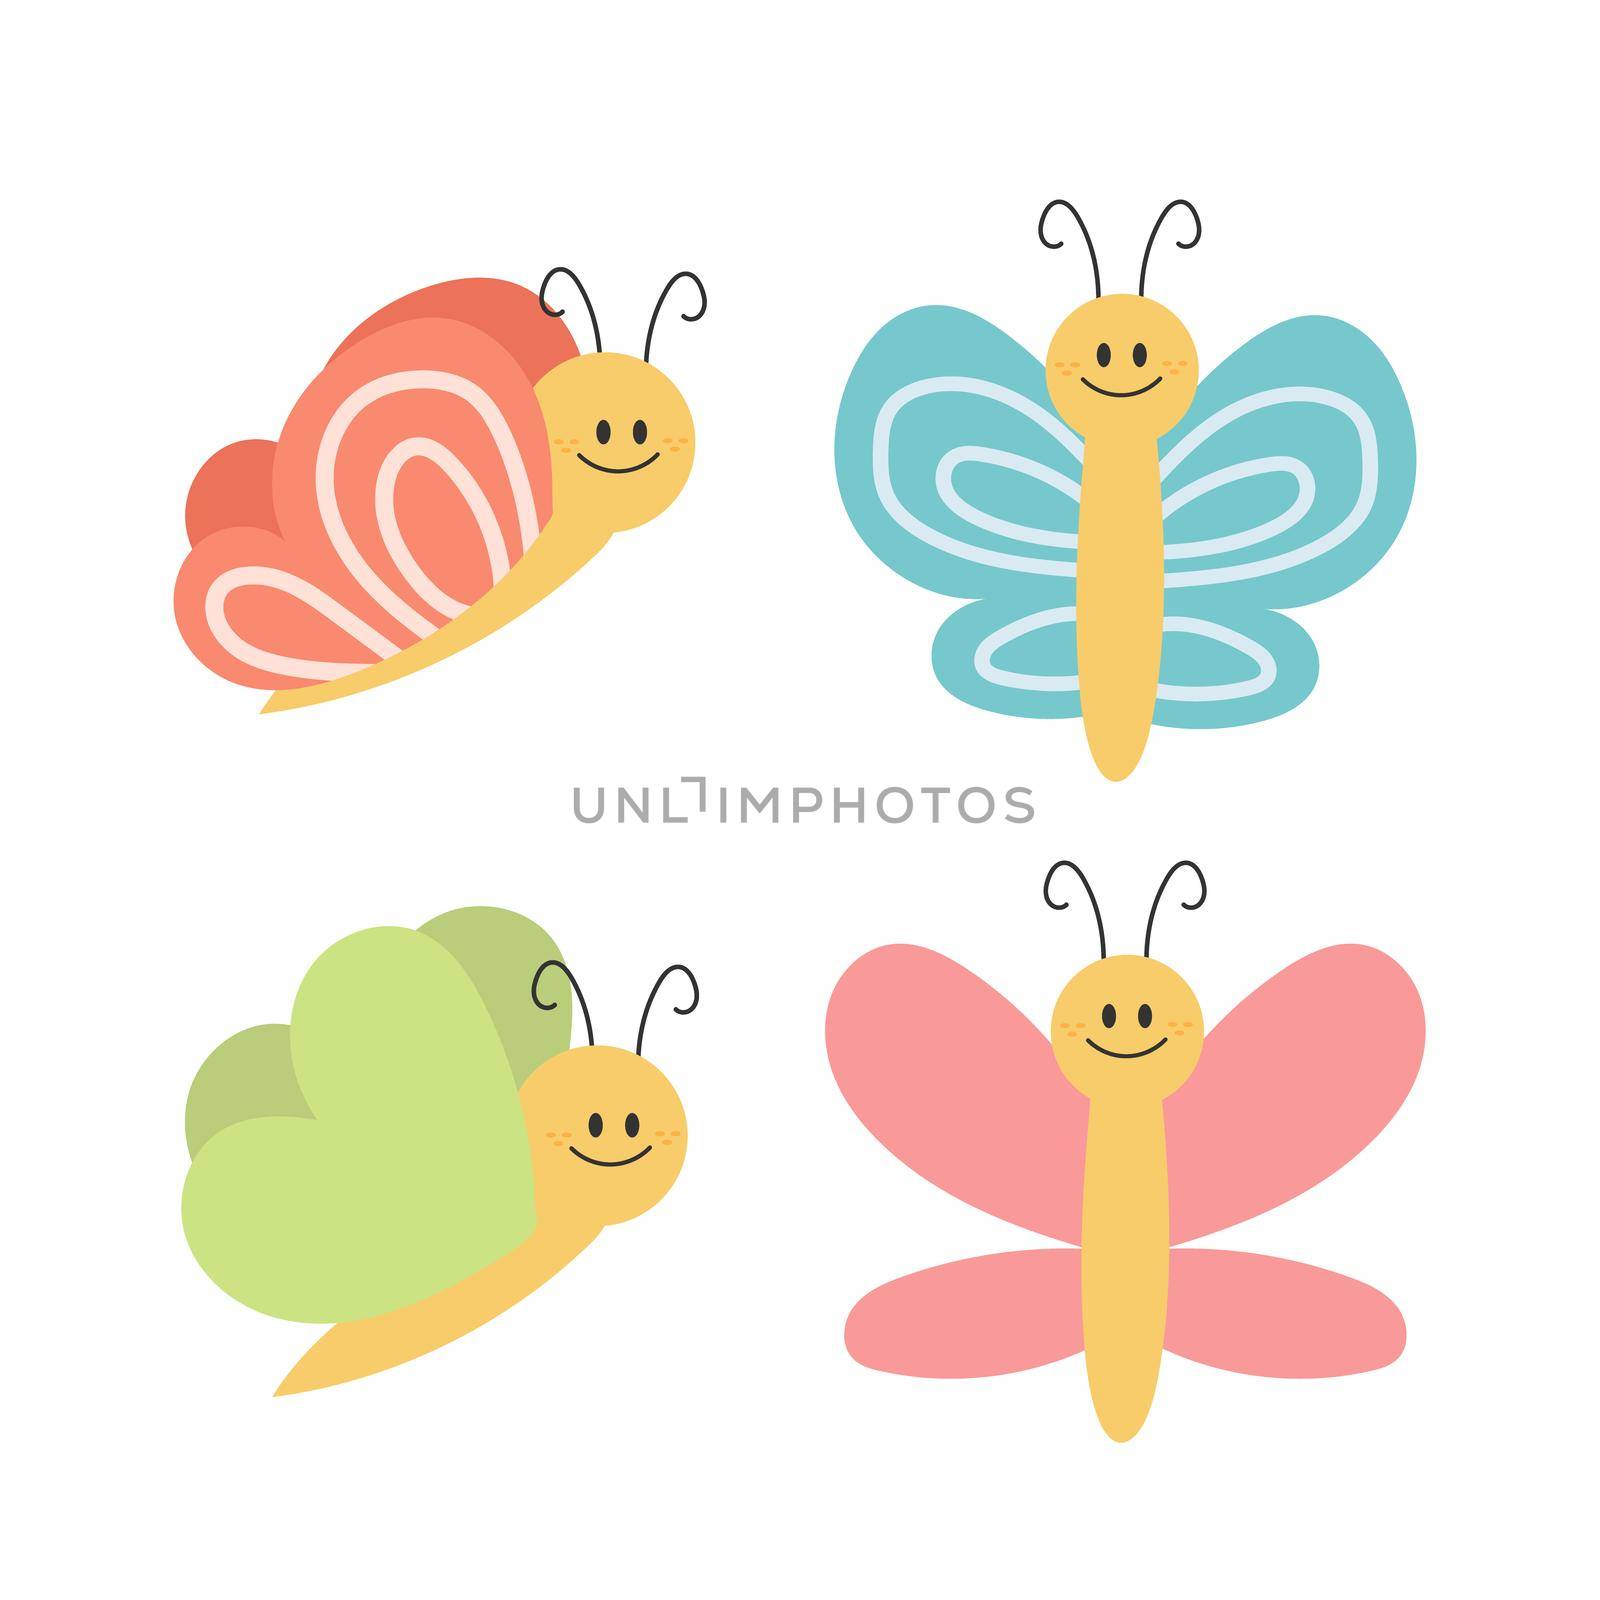 Cartoon butterfly. Cute smiling character for childish design. Flat vector illustration isolated on a white background. Hand drawn style